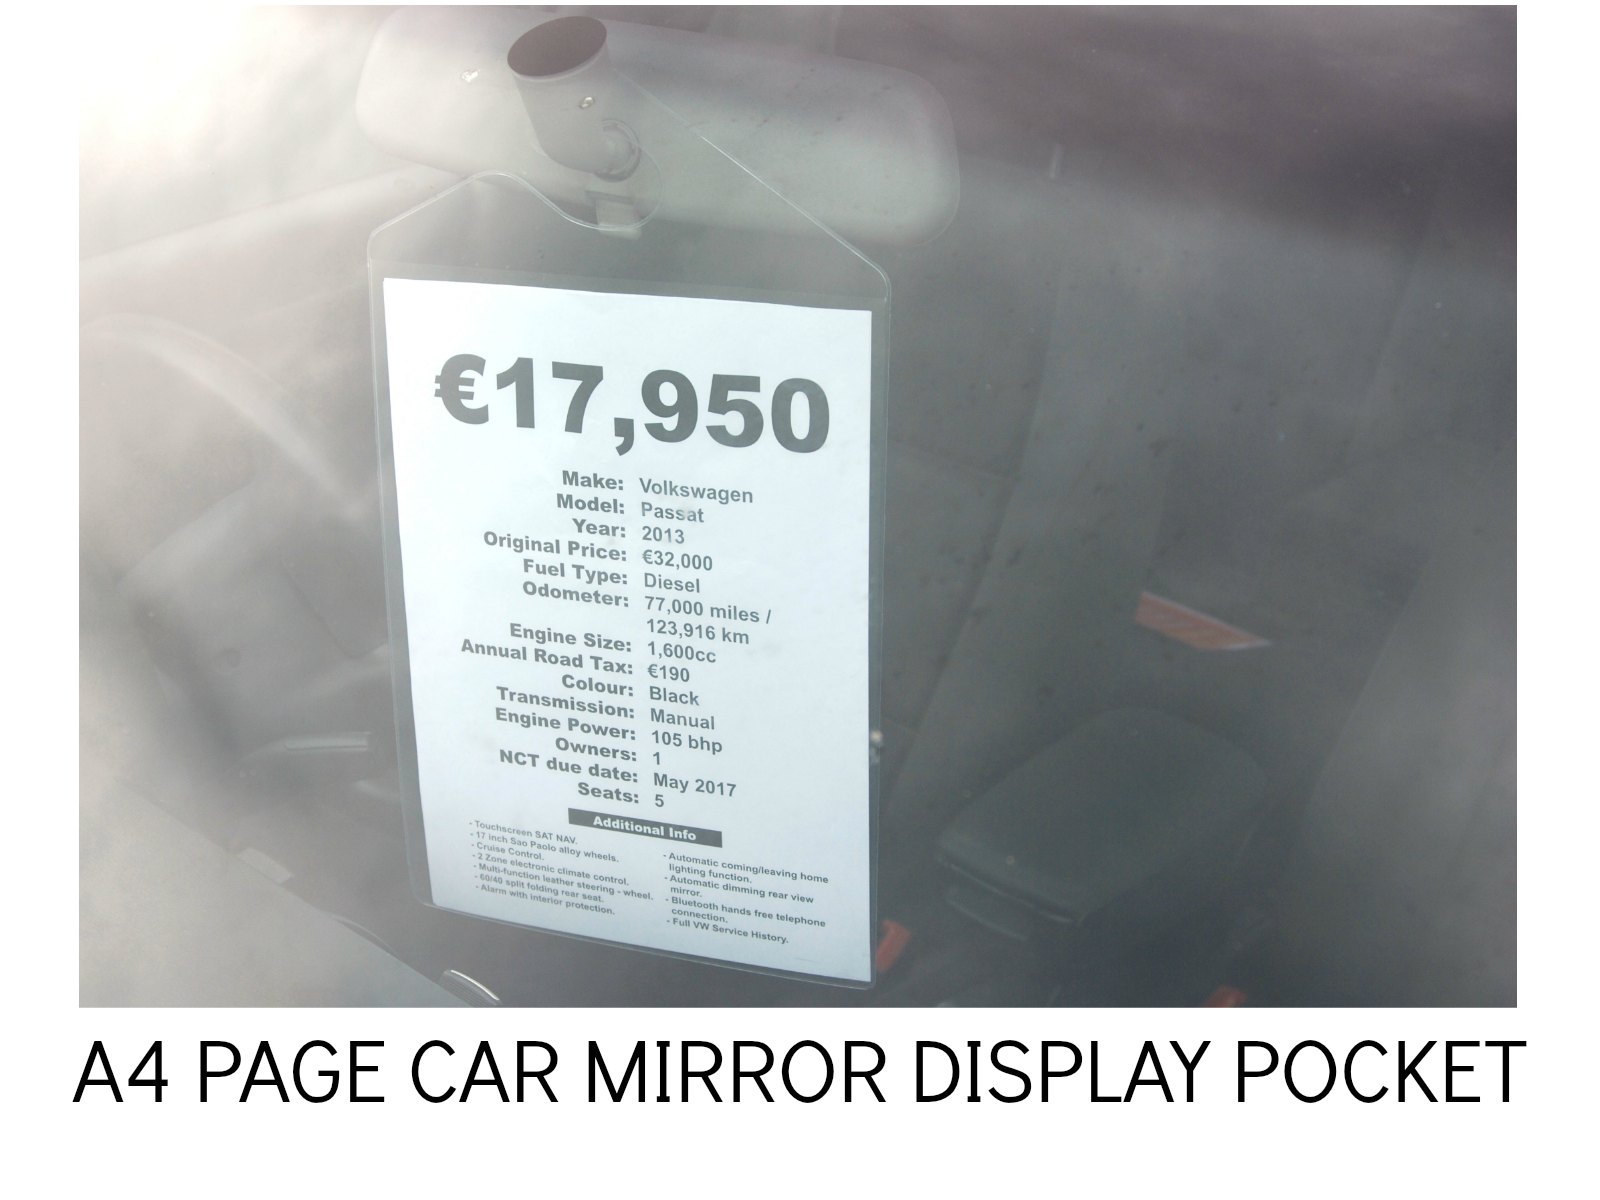 DISPLAY A4 PAGE FROM CAR MIRROR